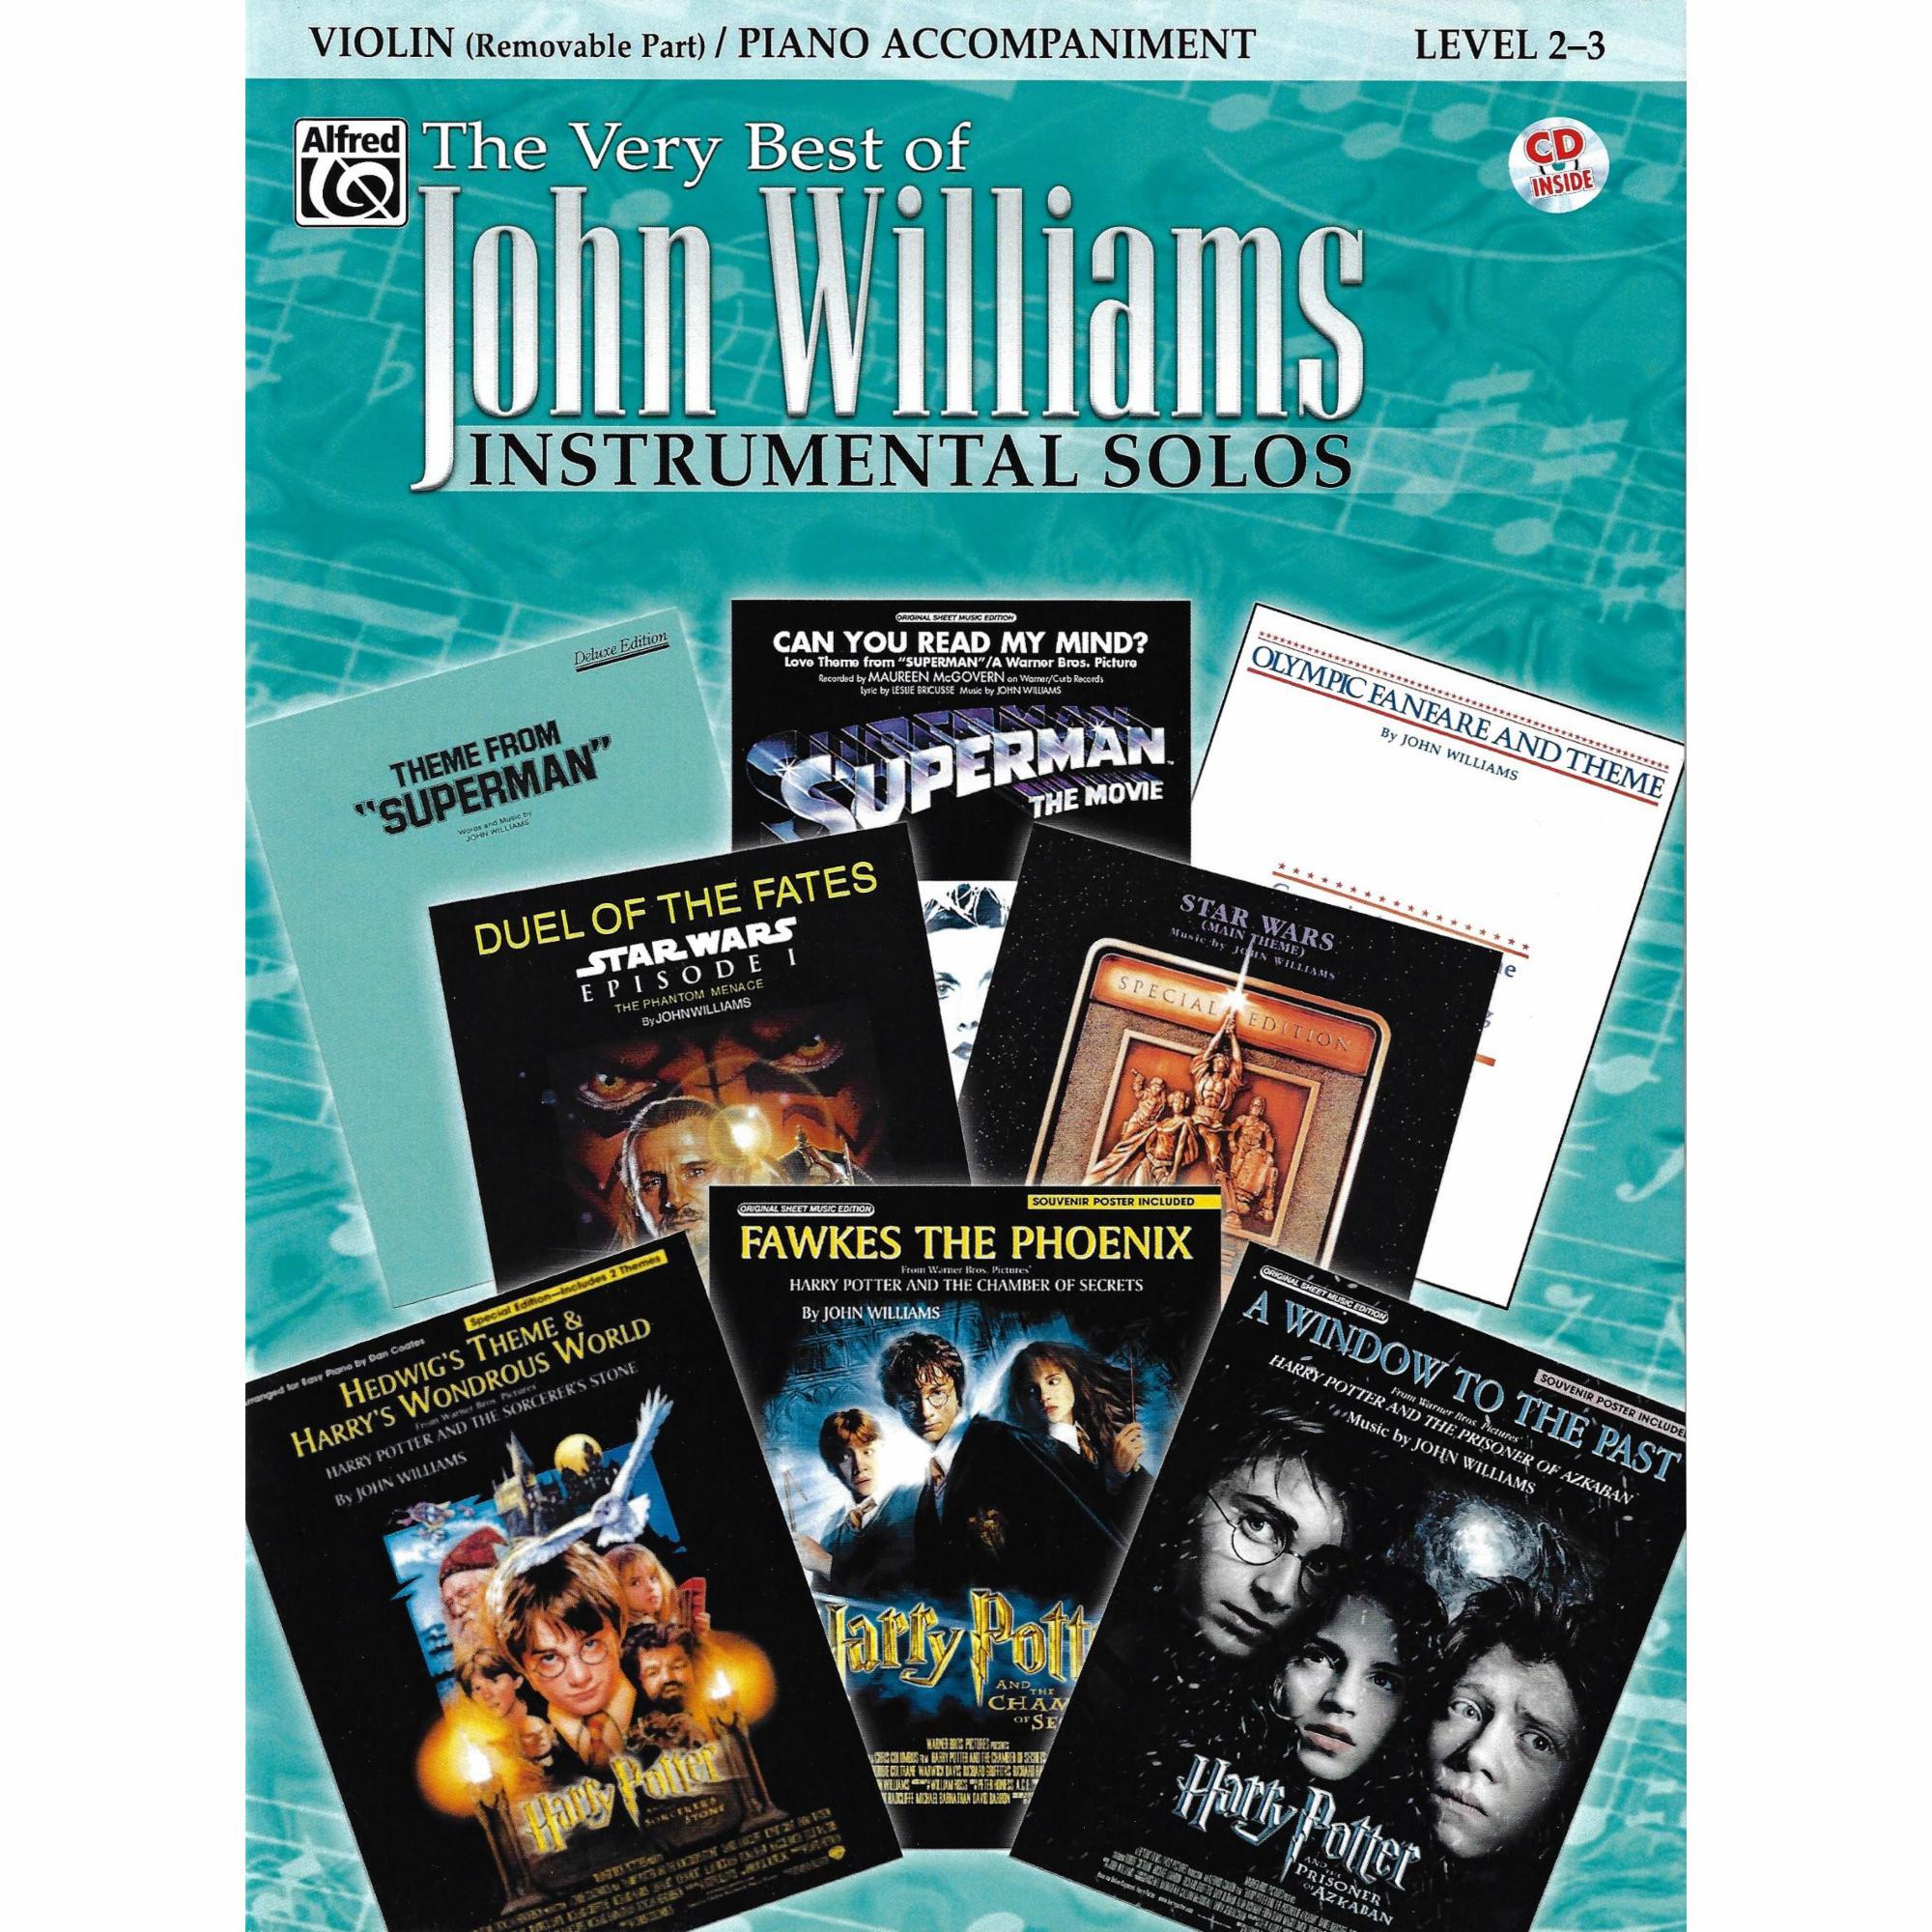 The Very Best of John Williams for Violin, Viola, or Cello and Piano